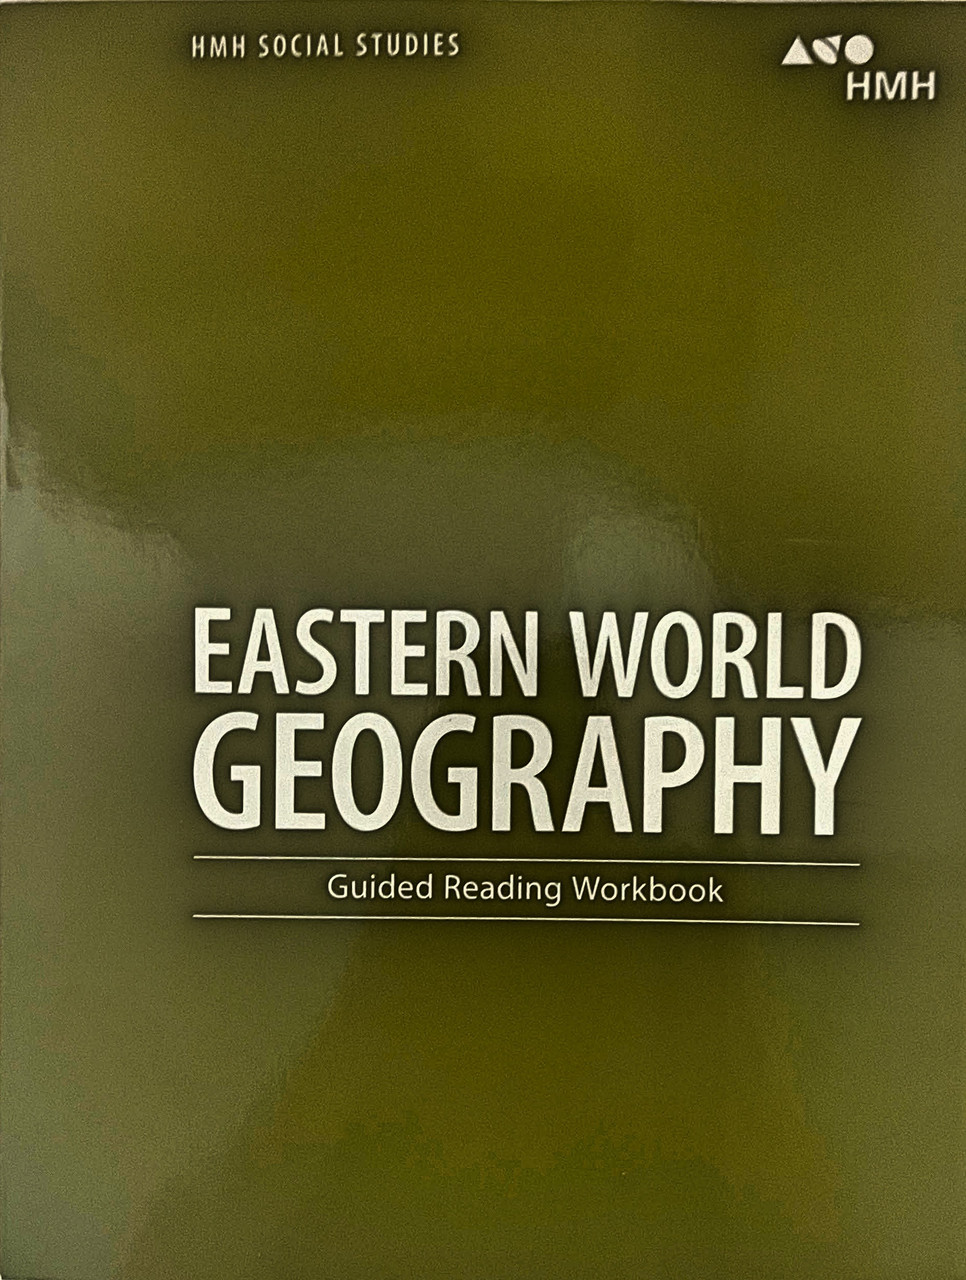 World　Workbook　HMH　World　Geography　Studies　Social　Reading　Eastern　Guided